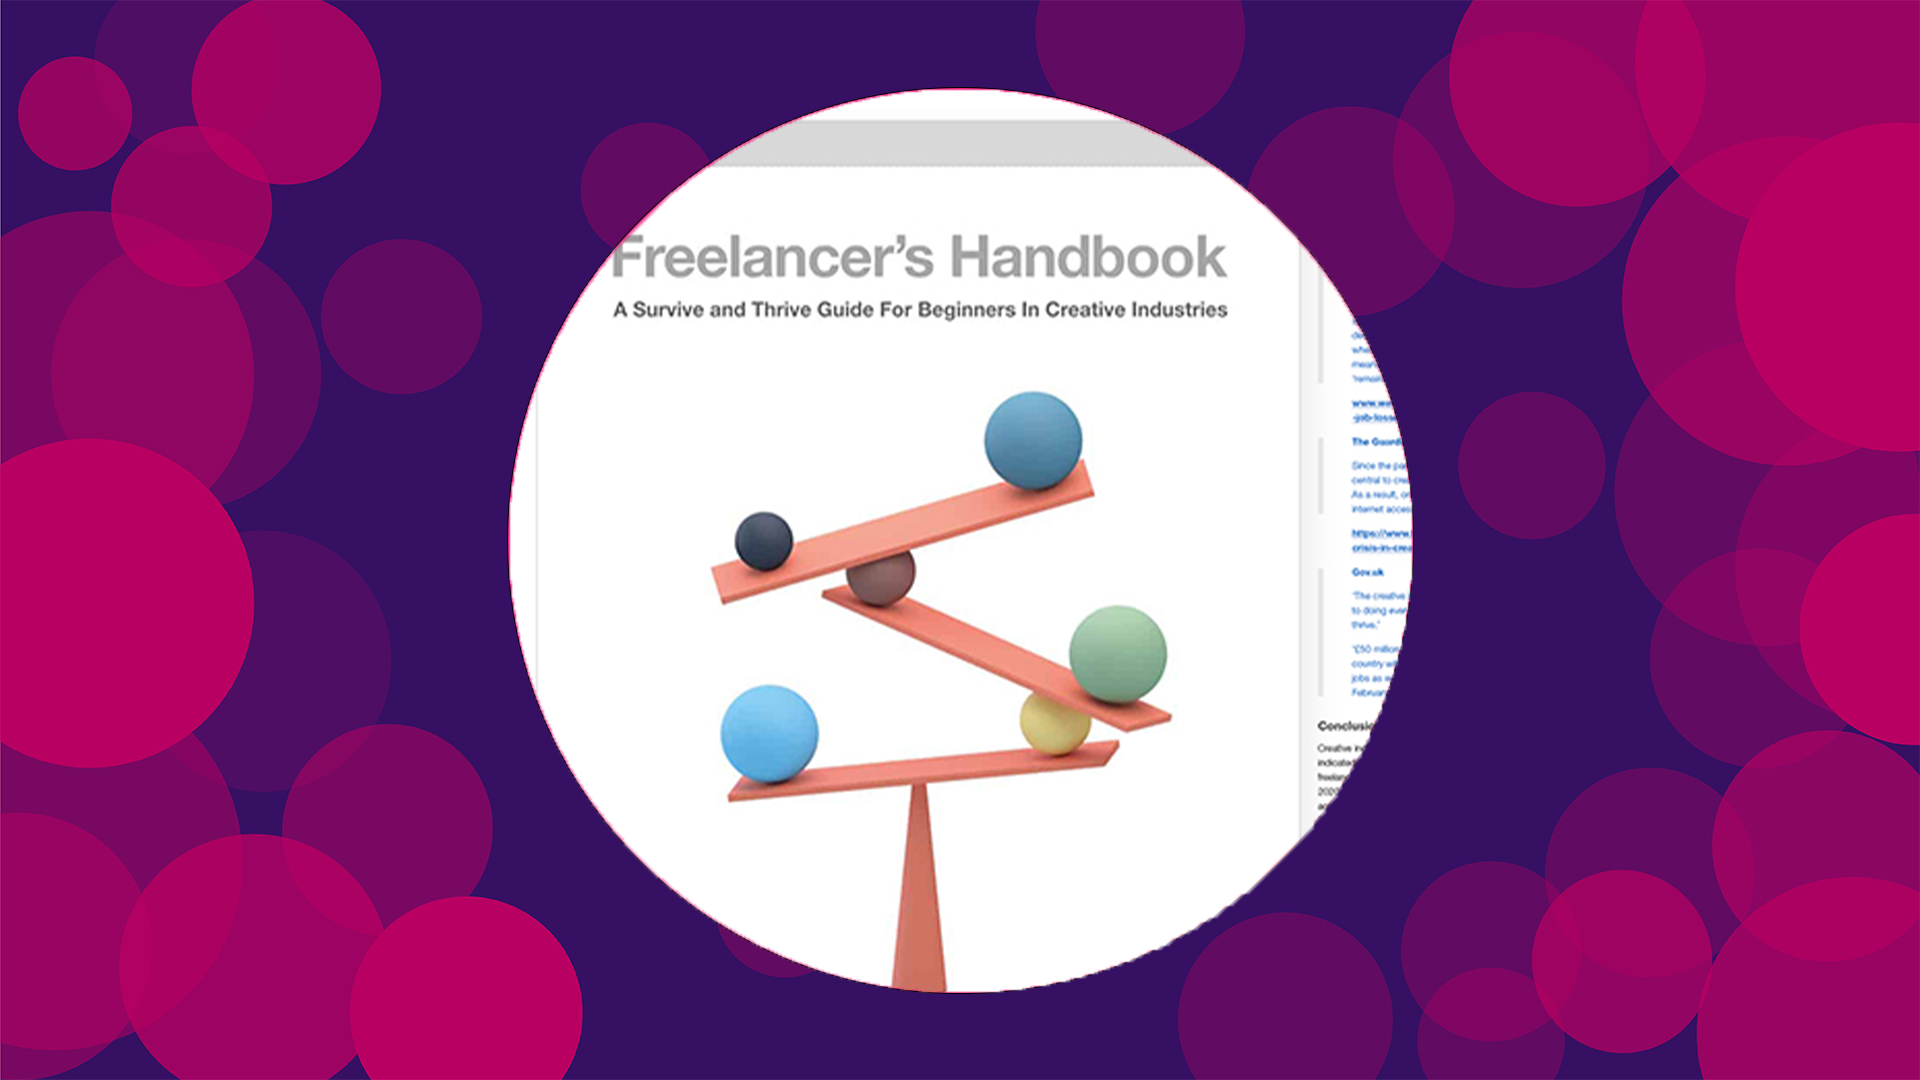 Purple background with pink circles with an image in the middle of the cover of freelancers hand book